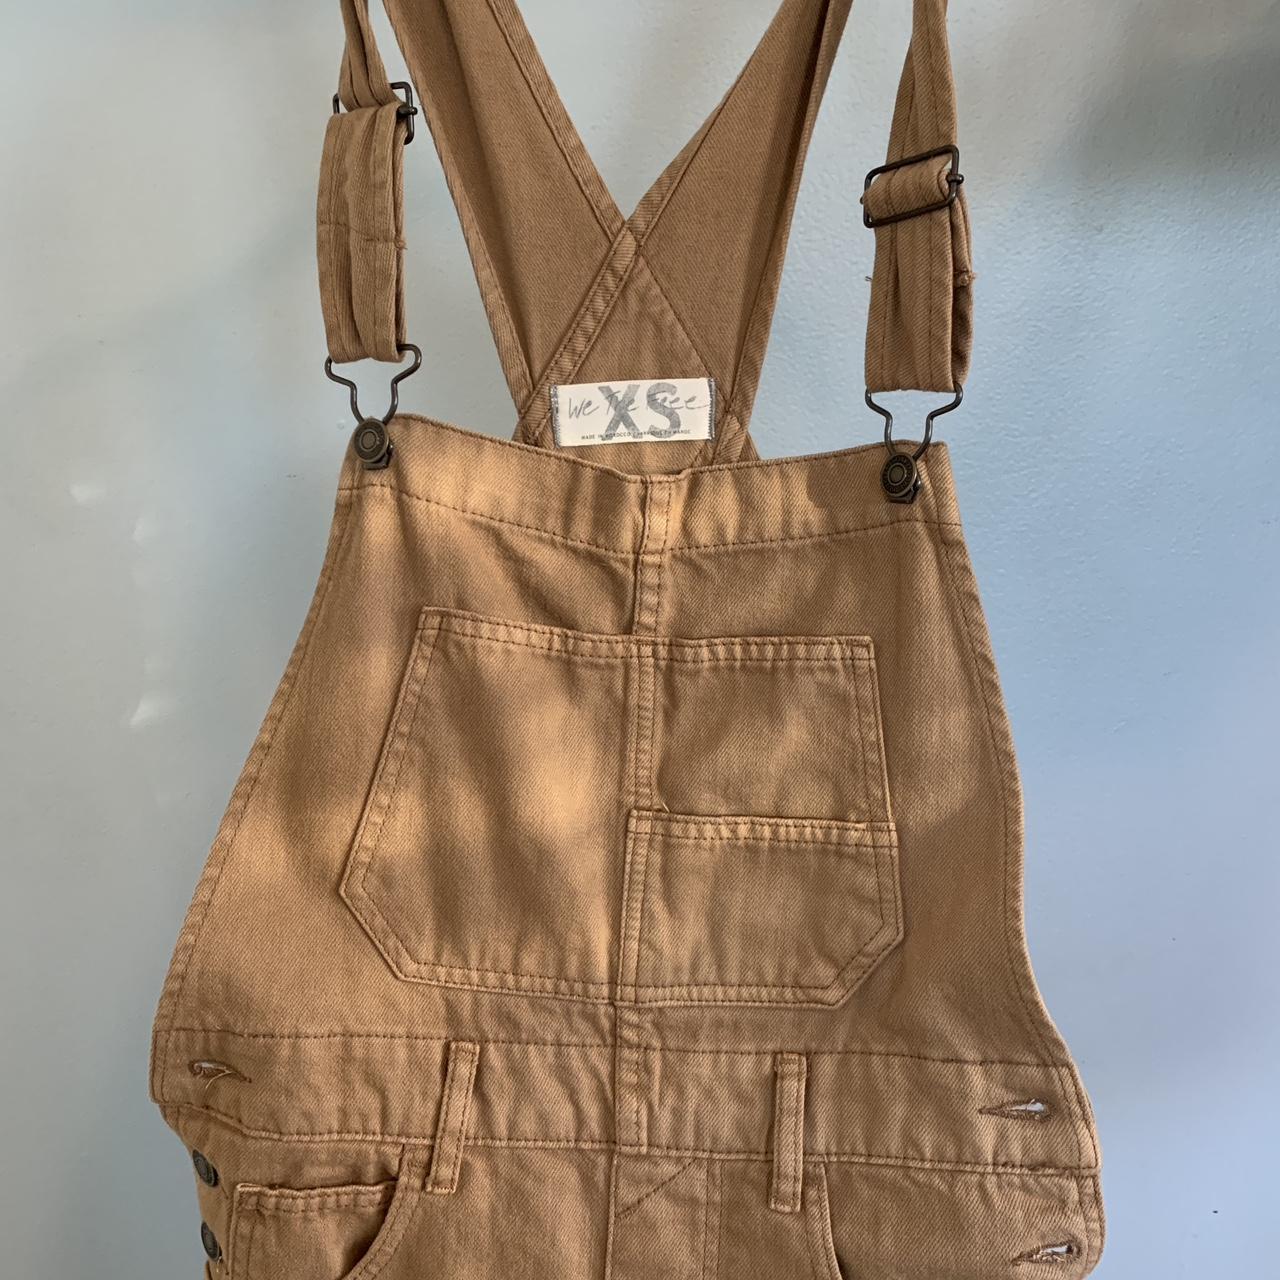 Free People Women's Tan and Brown Dungarees-overalls